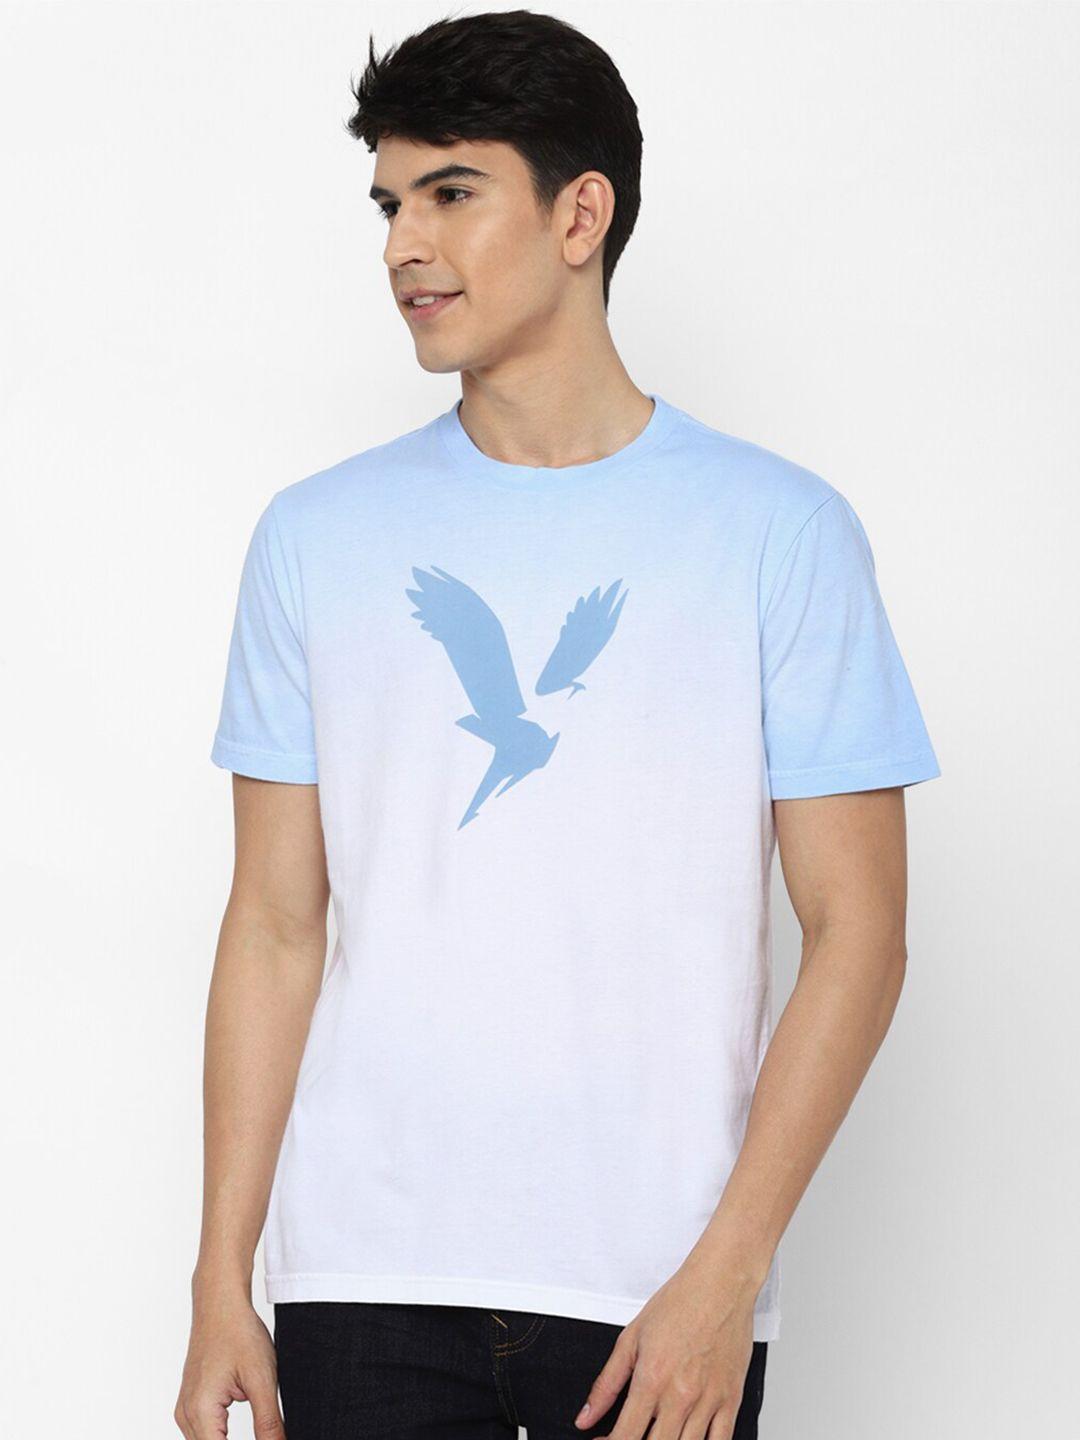 american-eagle-outfitters-men-white-&-blue-printed-pure-cotton-t-shirt